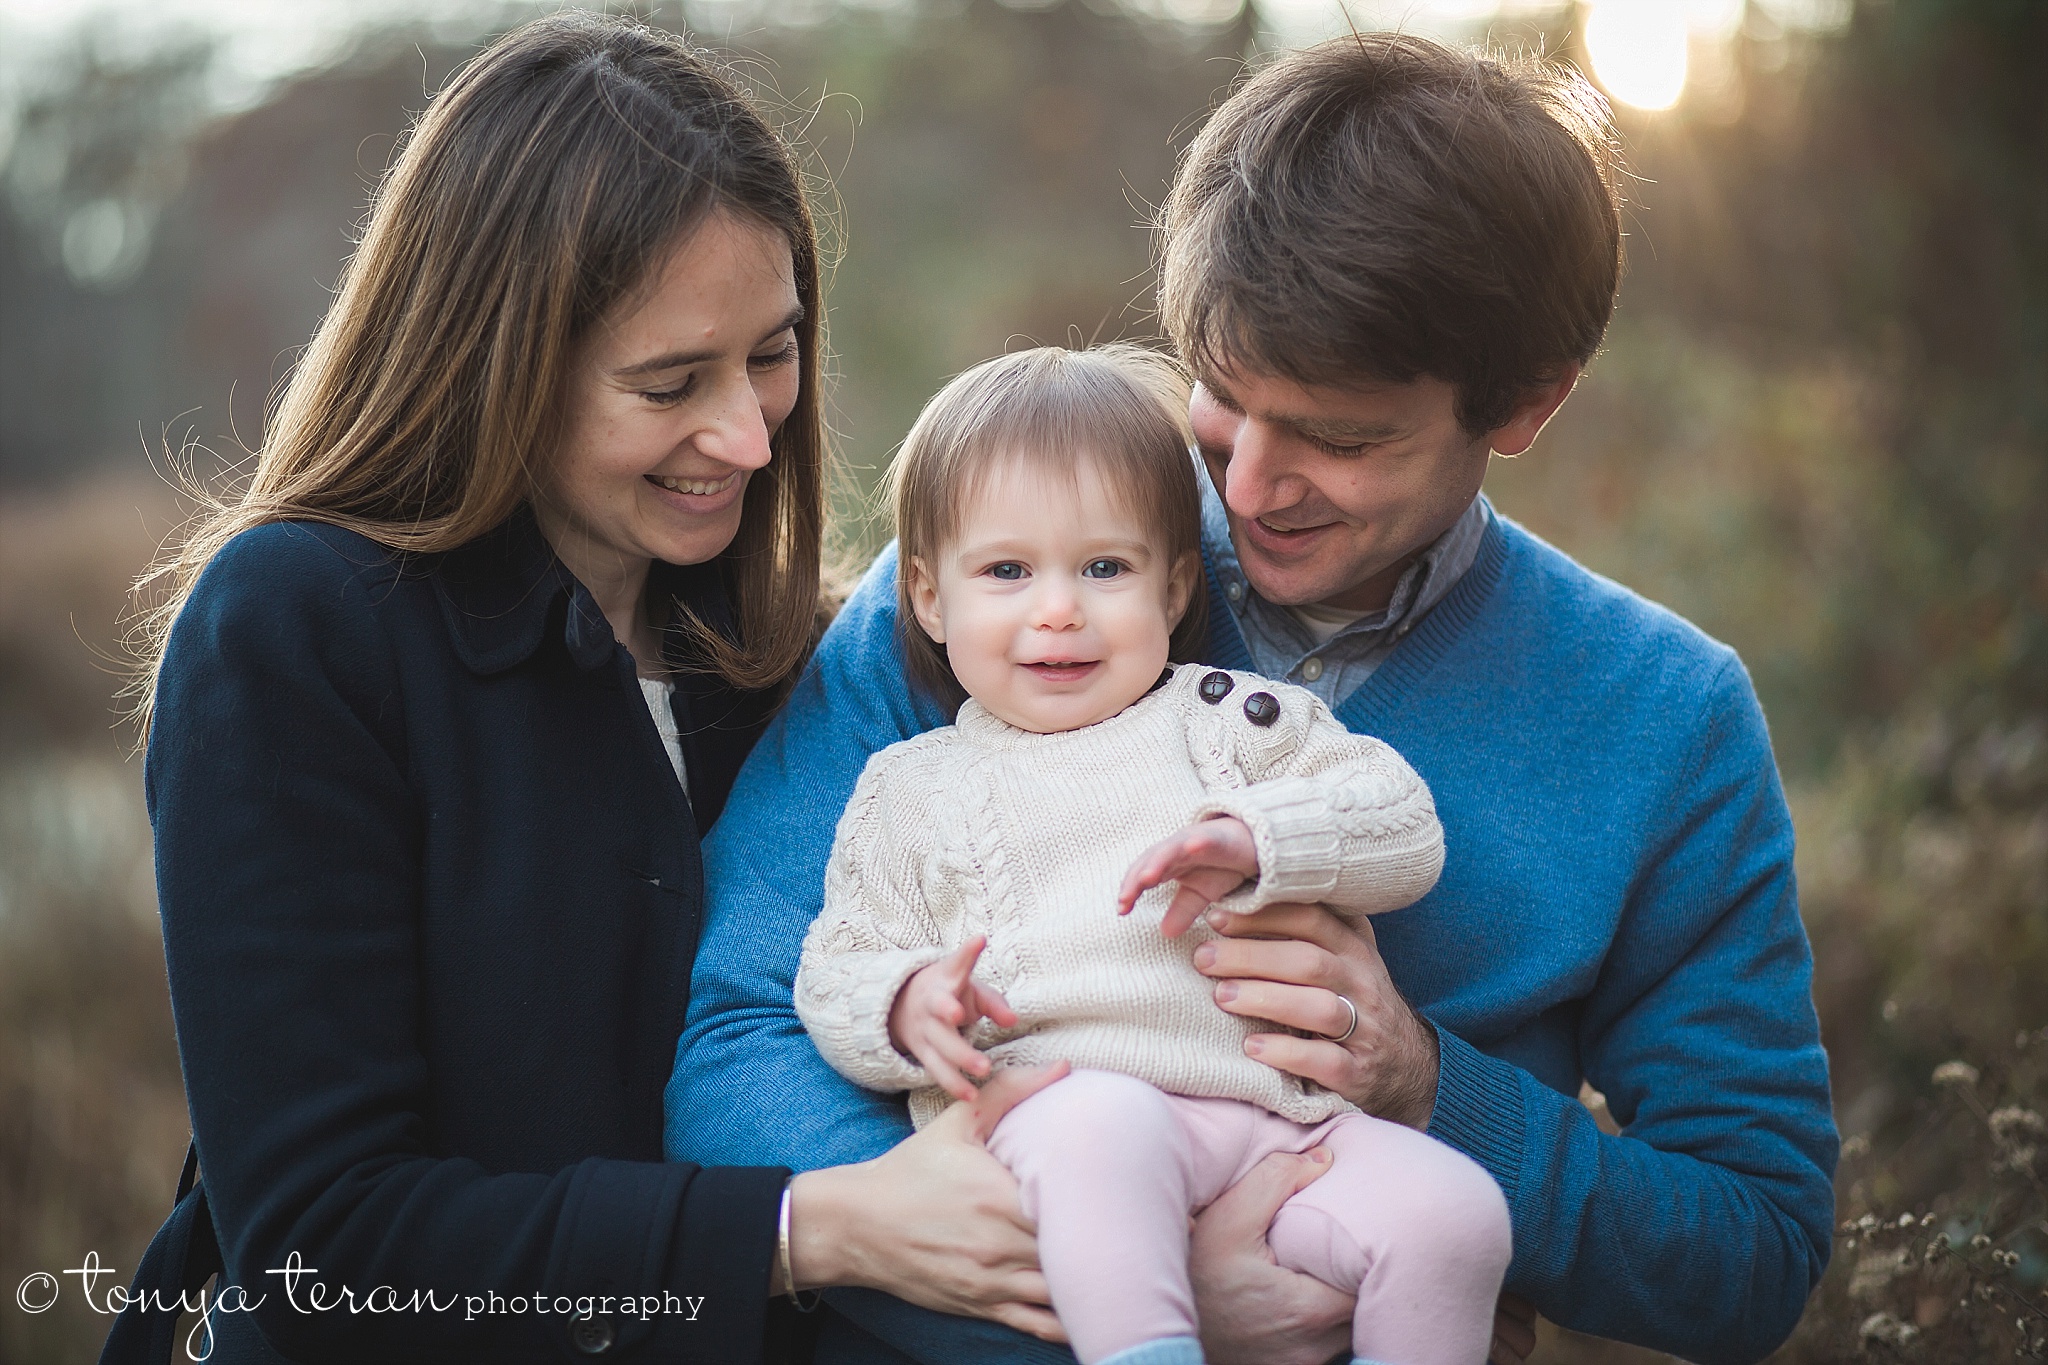 Outdoor Fall Family Photo Session | Tonya Teran Photography, Rockville, MD Newborn, Baby, and Family Photographer